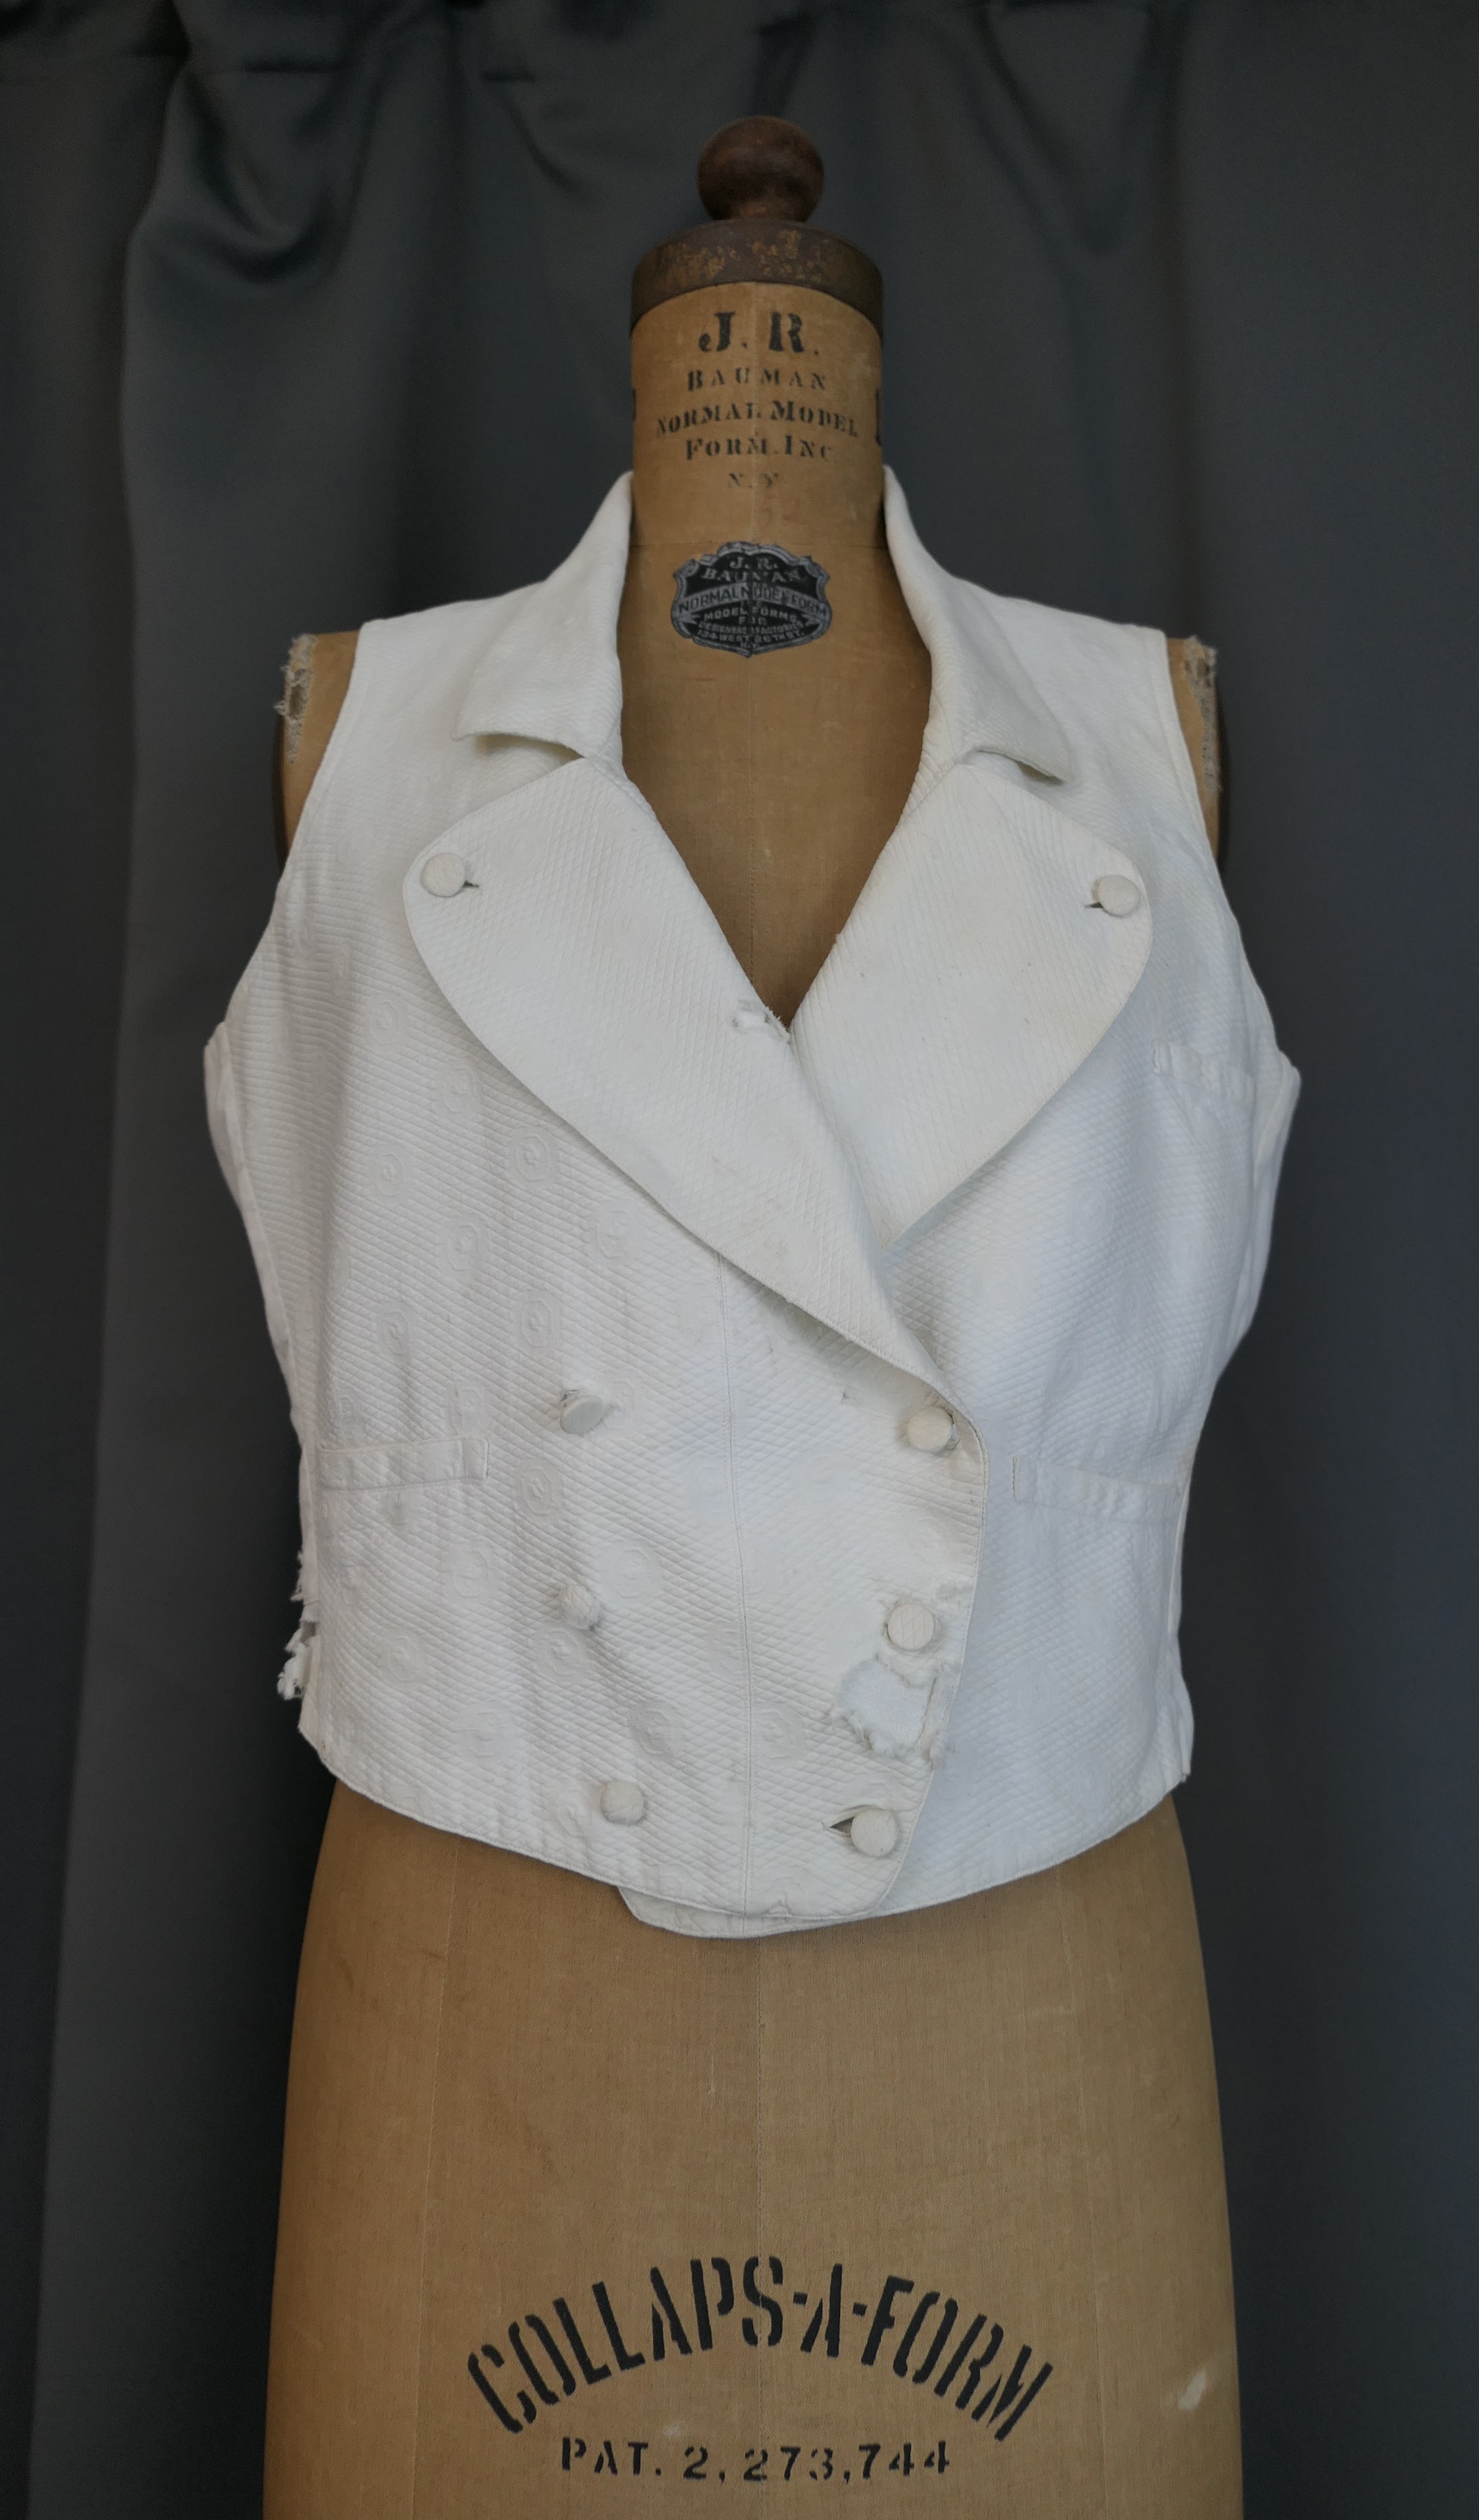 Victorian Men's Antique White Vest Waistcoat, Cotton Matelasse, 38 inch chest, with issues, note of provenance wedding 1875